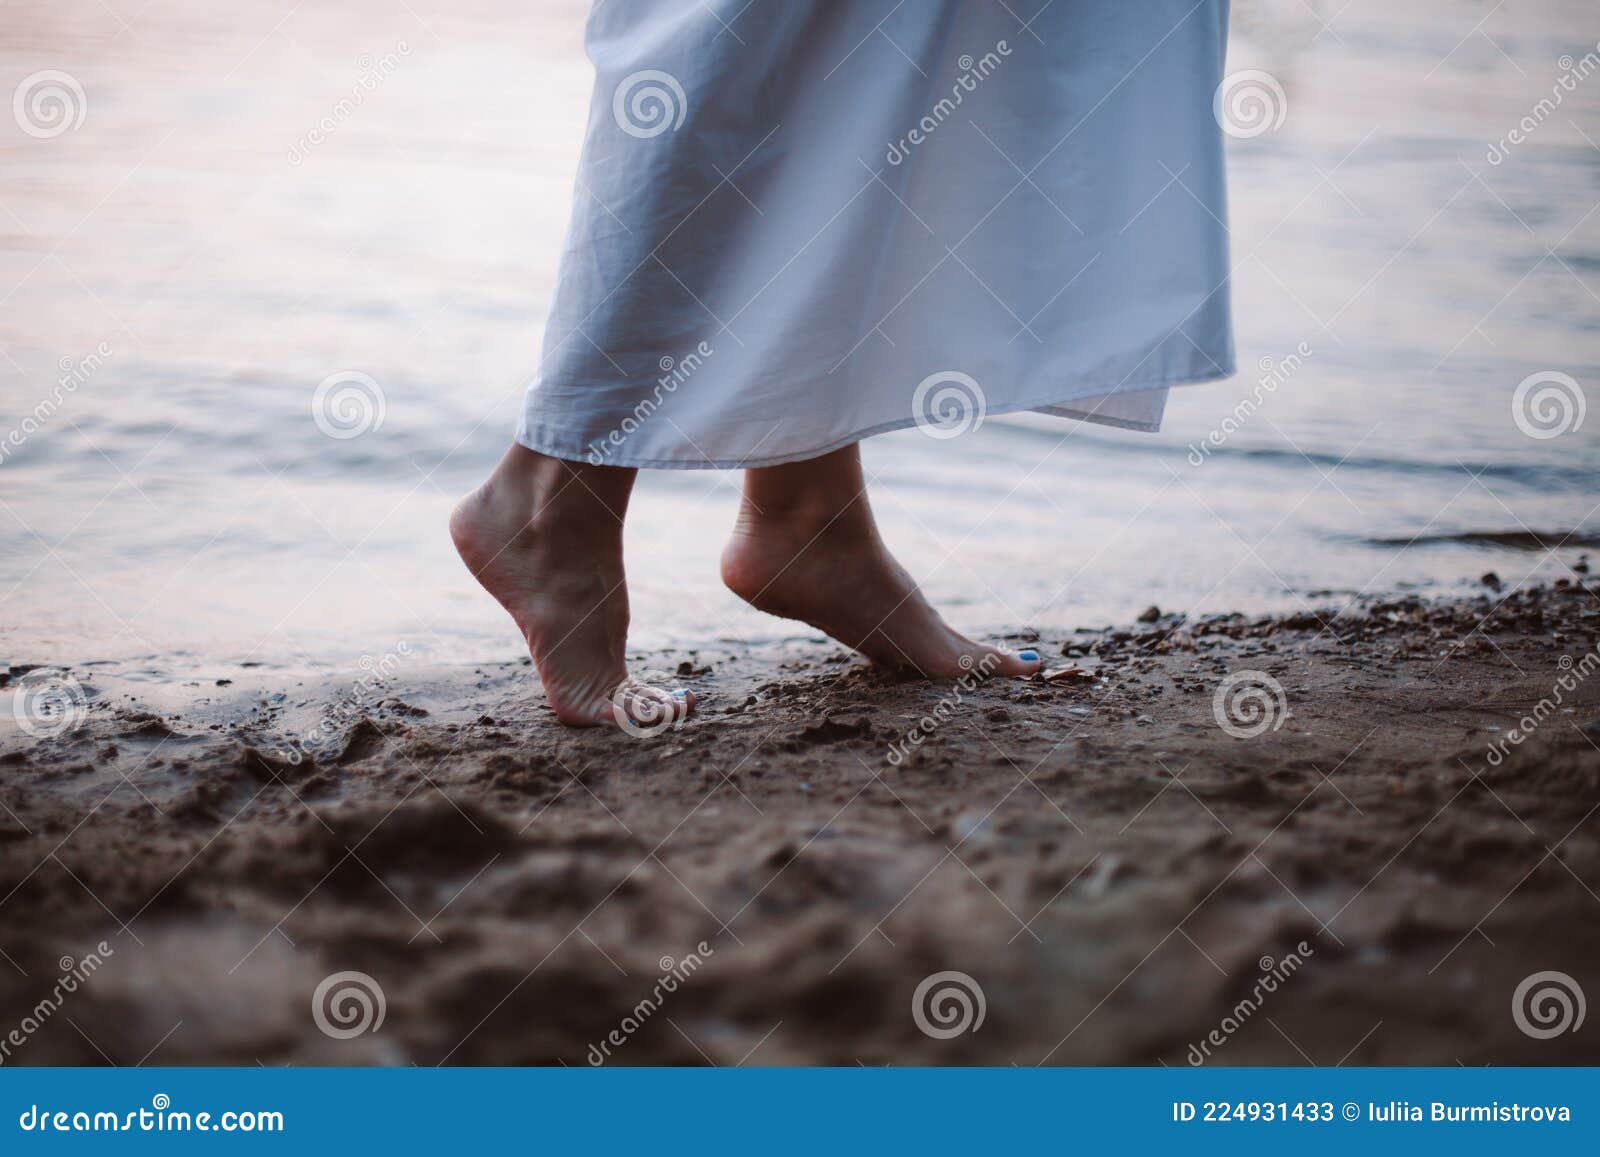 Women& X27;s Feet in the River. Close-up Side View of a Young Woman ...